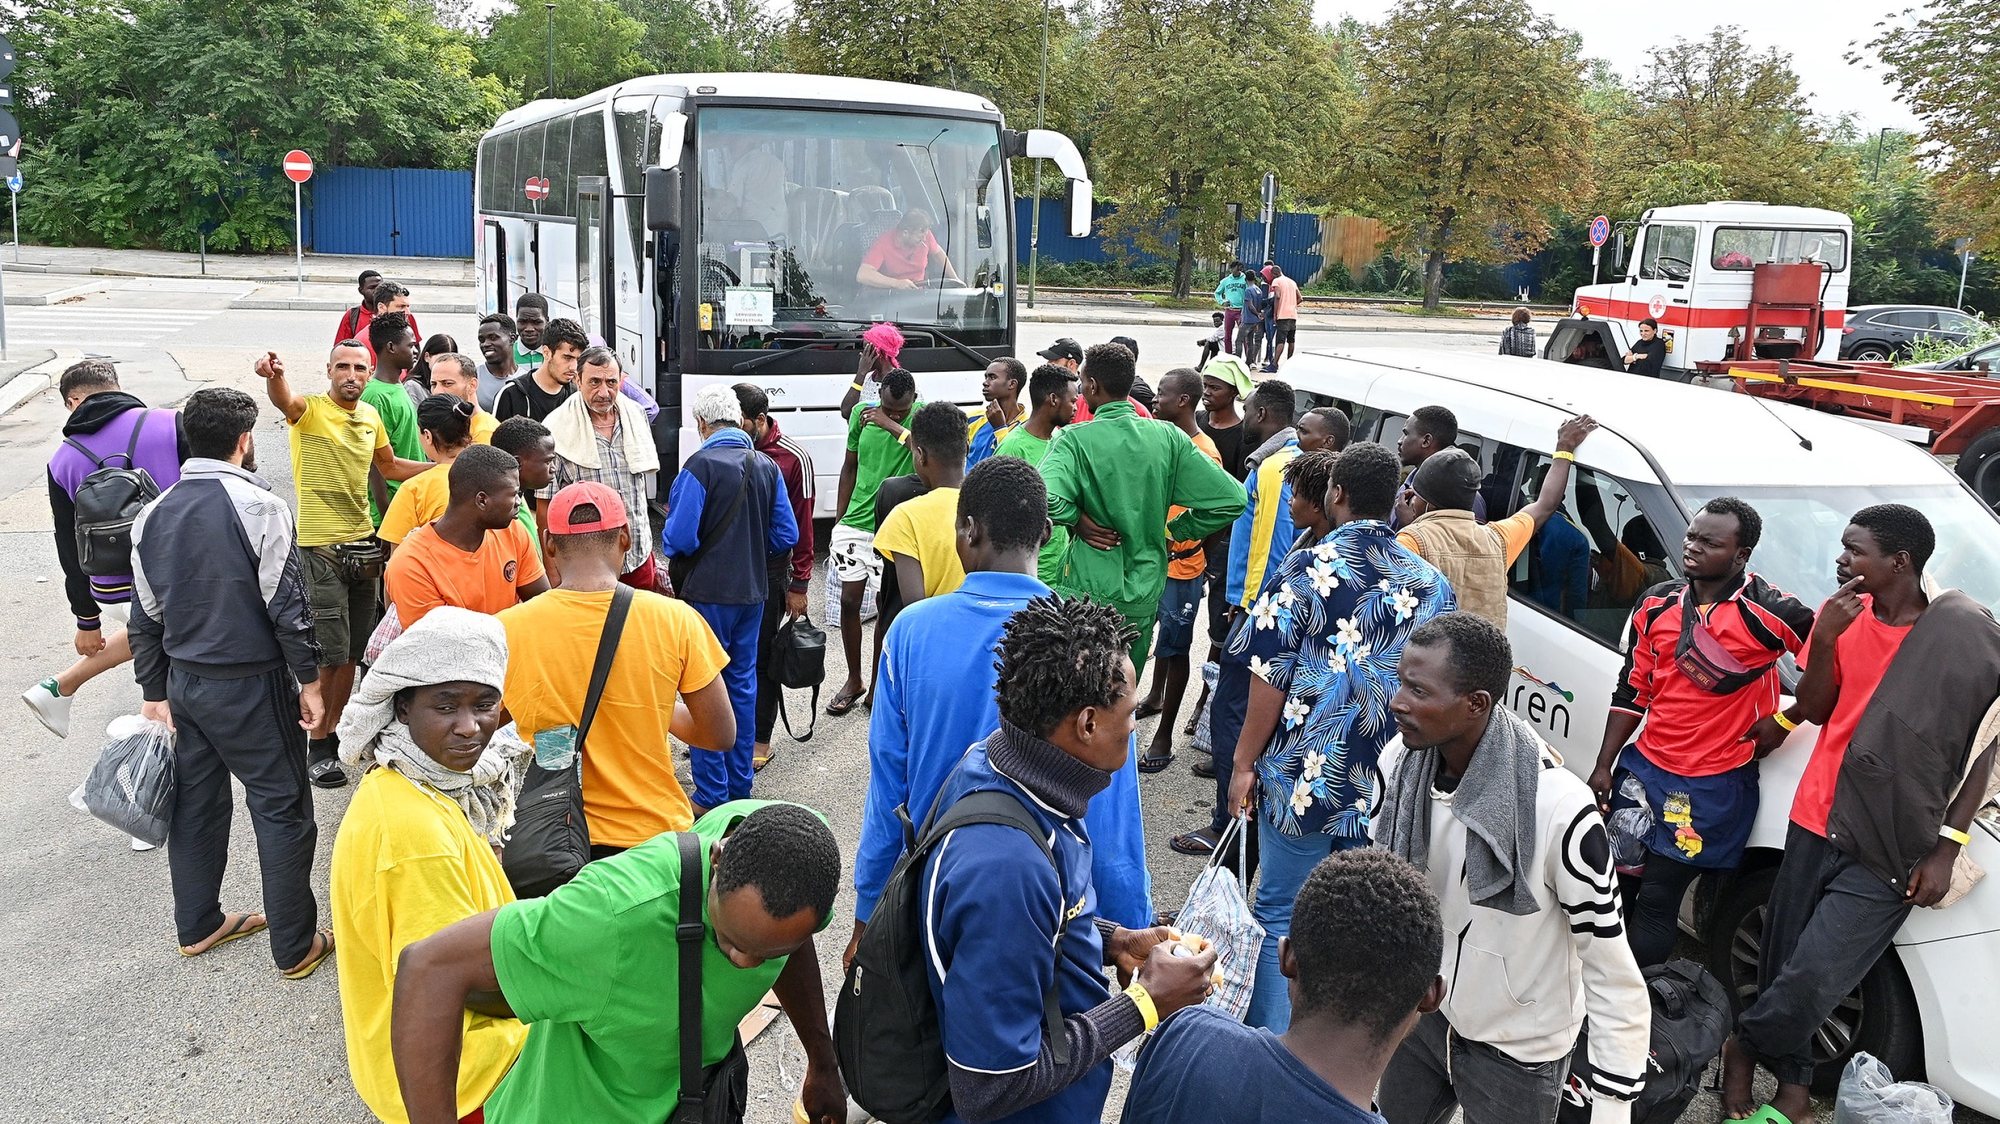 epa10871649 Migrants arrive by bus at the Red Cross reception centre in Via Tres, Turin, Italy, 20 September 2023. The center houses some 500 people in a compound and facilities which are meant for between 140 and 180 people in need. Italy saw an influx of thousands of migrants in the past weeks. According to Italy&#039;s Interior Ministry, nearly 126,000 immigrants and refugees have entered the country as of 2023, more than twice as many as during the same time period in 2022.  EPA/ALESSANDRO DI MARCO